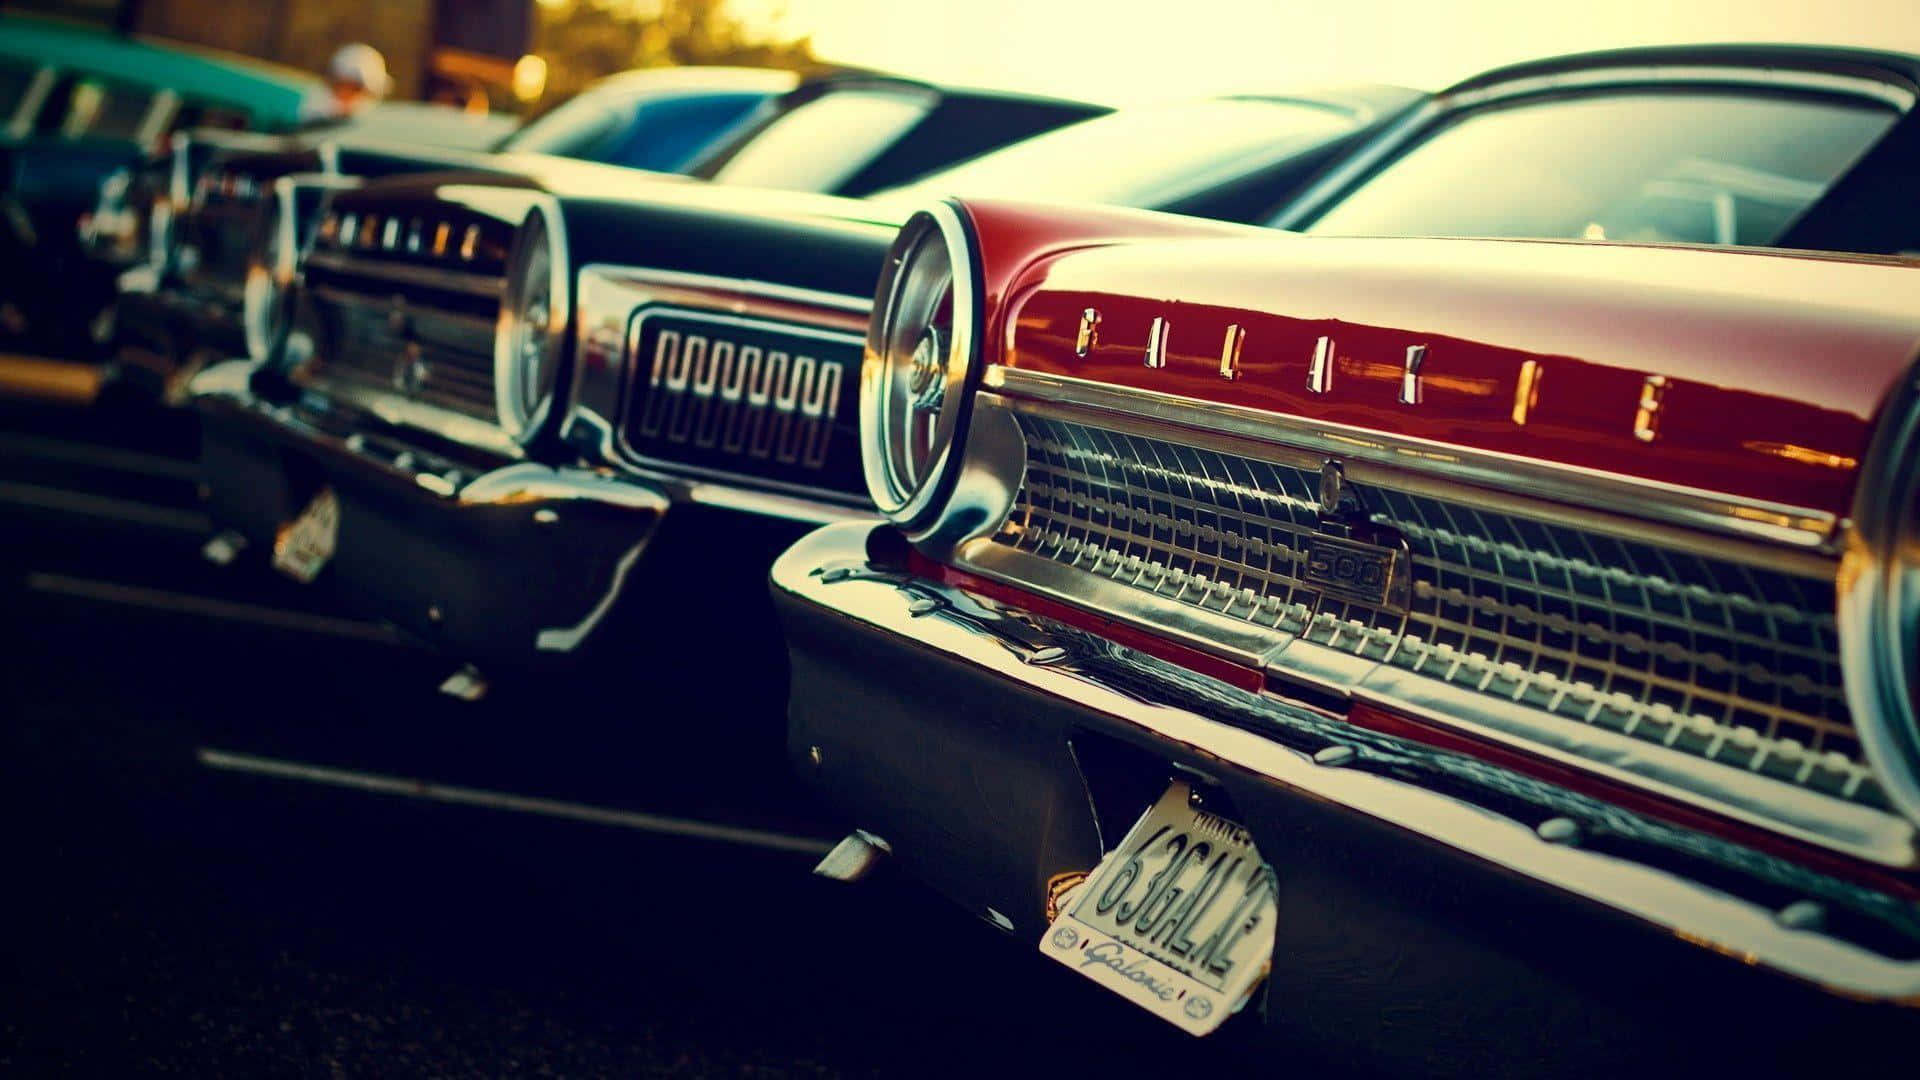 "Nothing Beats The Timeless Style of a Cadillac"